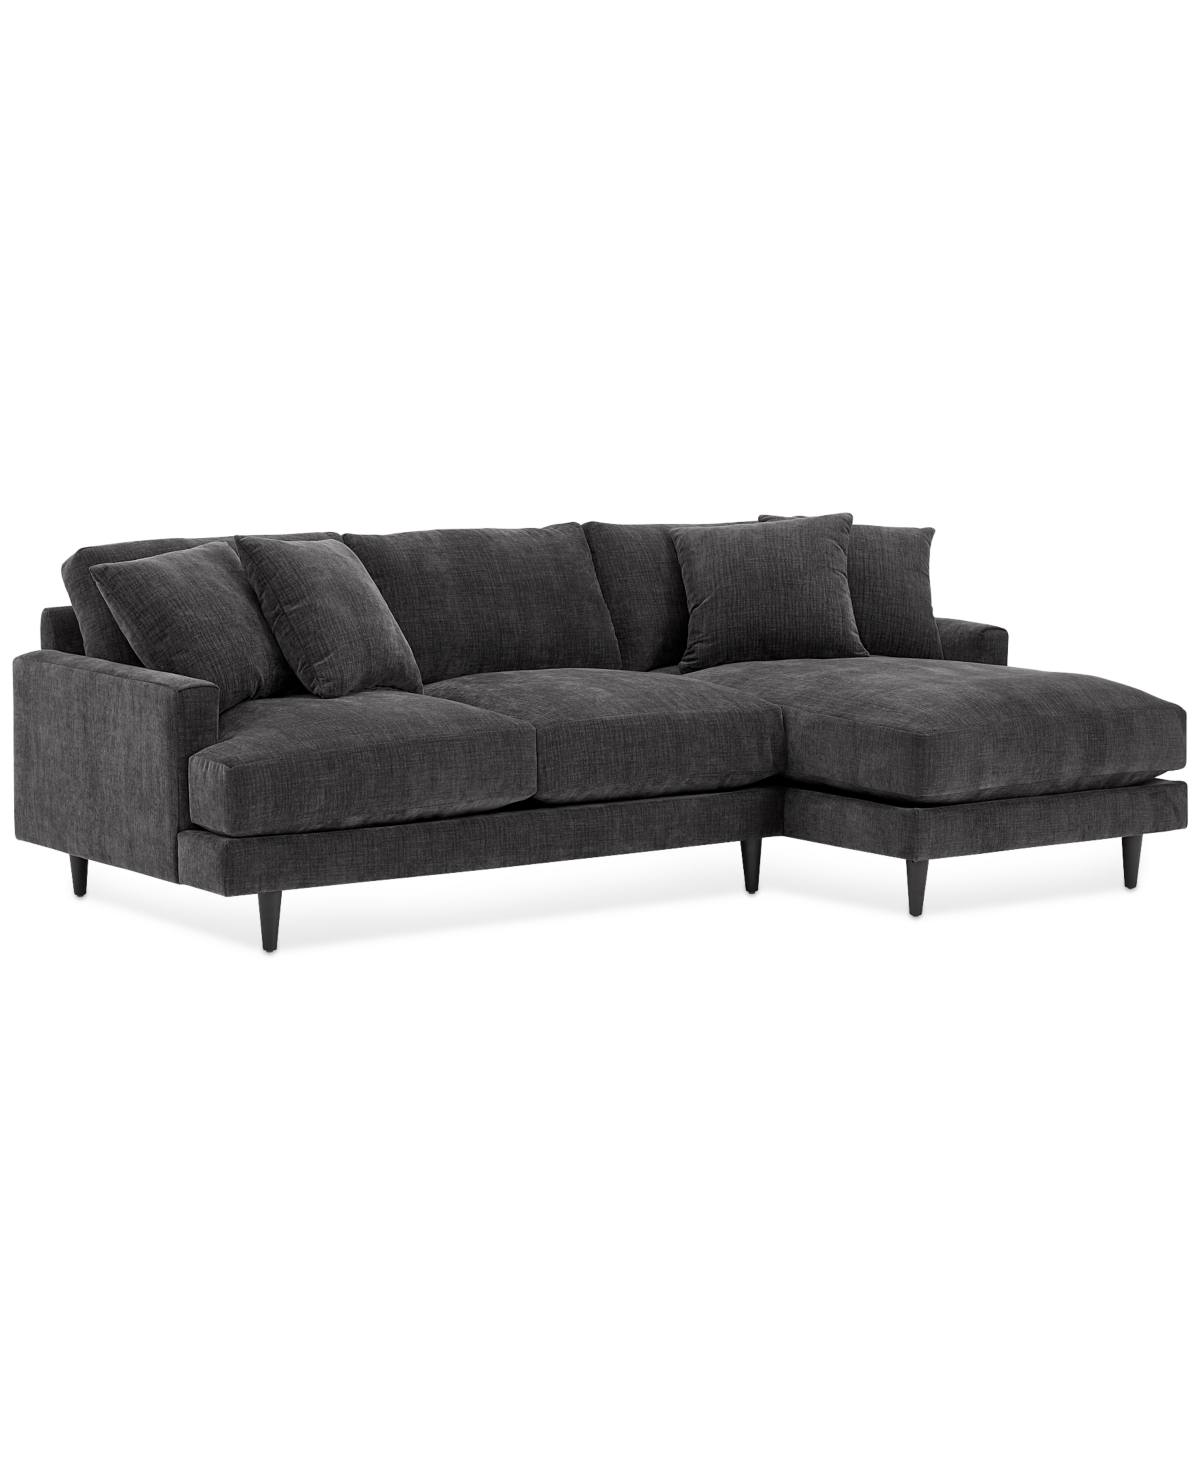 Furniture Mariyah Fabric 2-pc. Sofa With Chaise, Created For Macy's In Storm